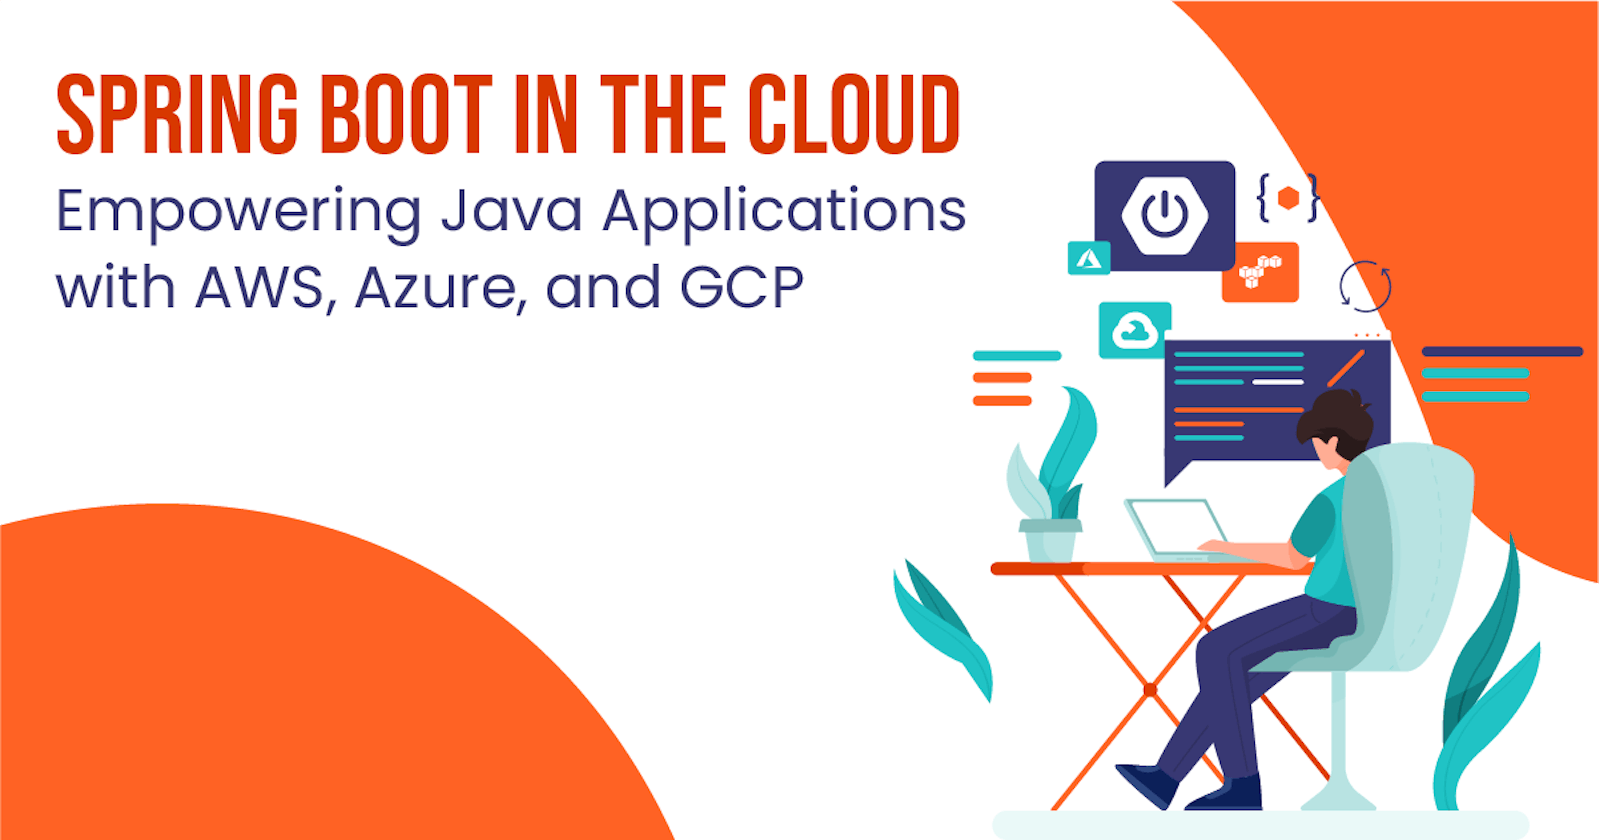 Spring Boot in the Cloud: Empowering Java Applications with AWS, Azure, and GCP